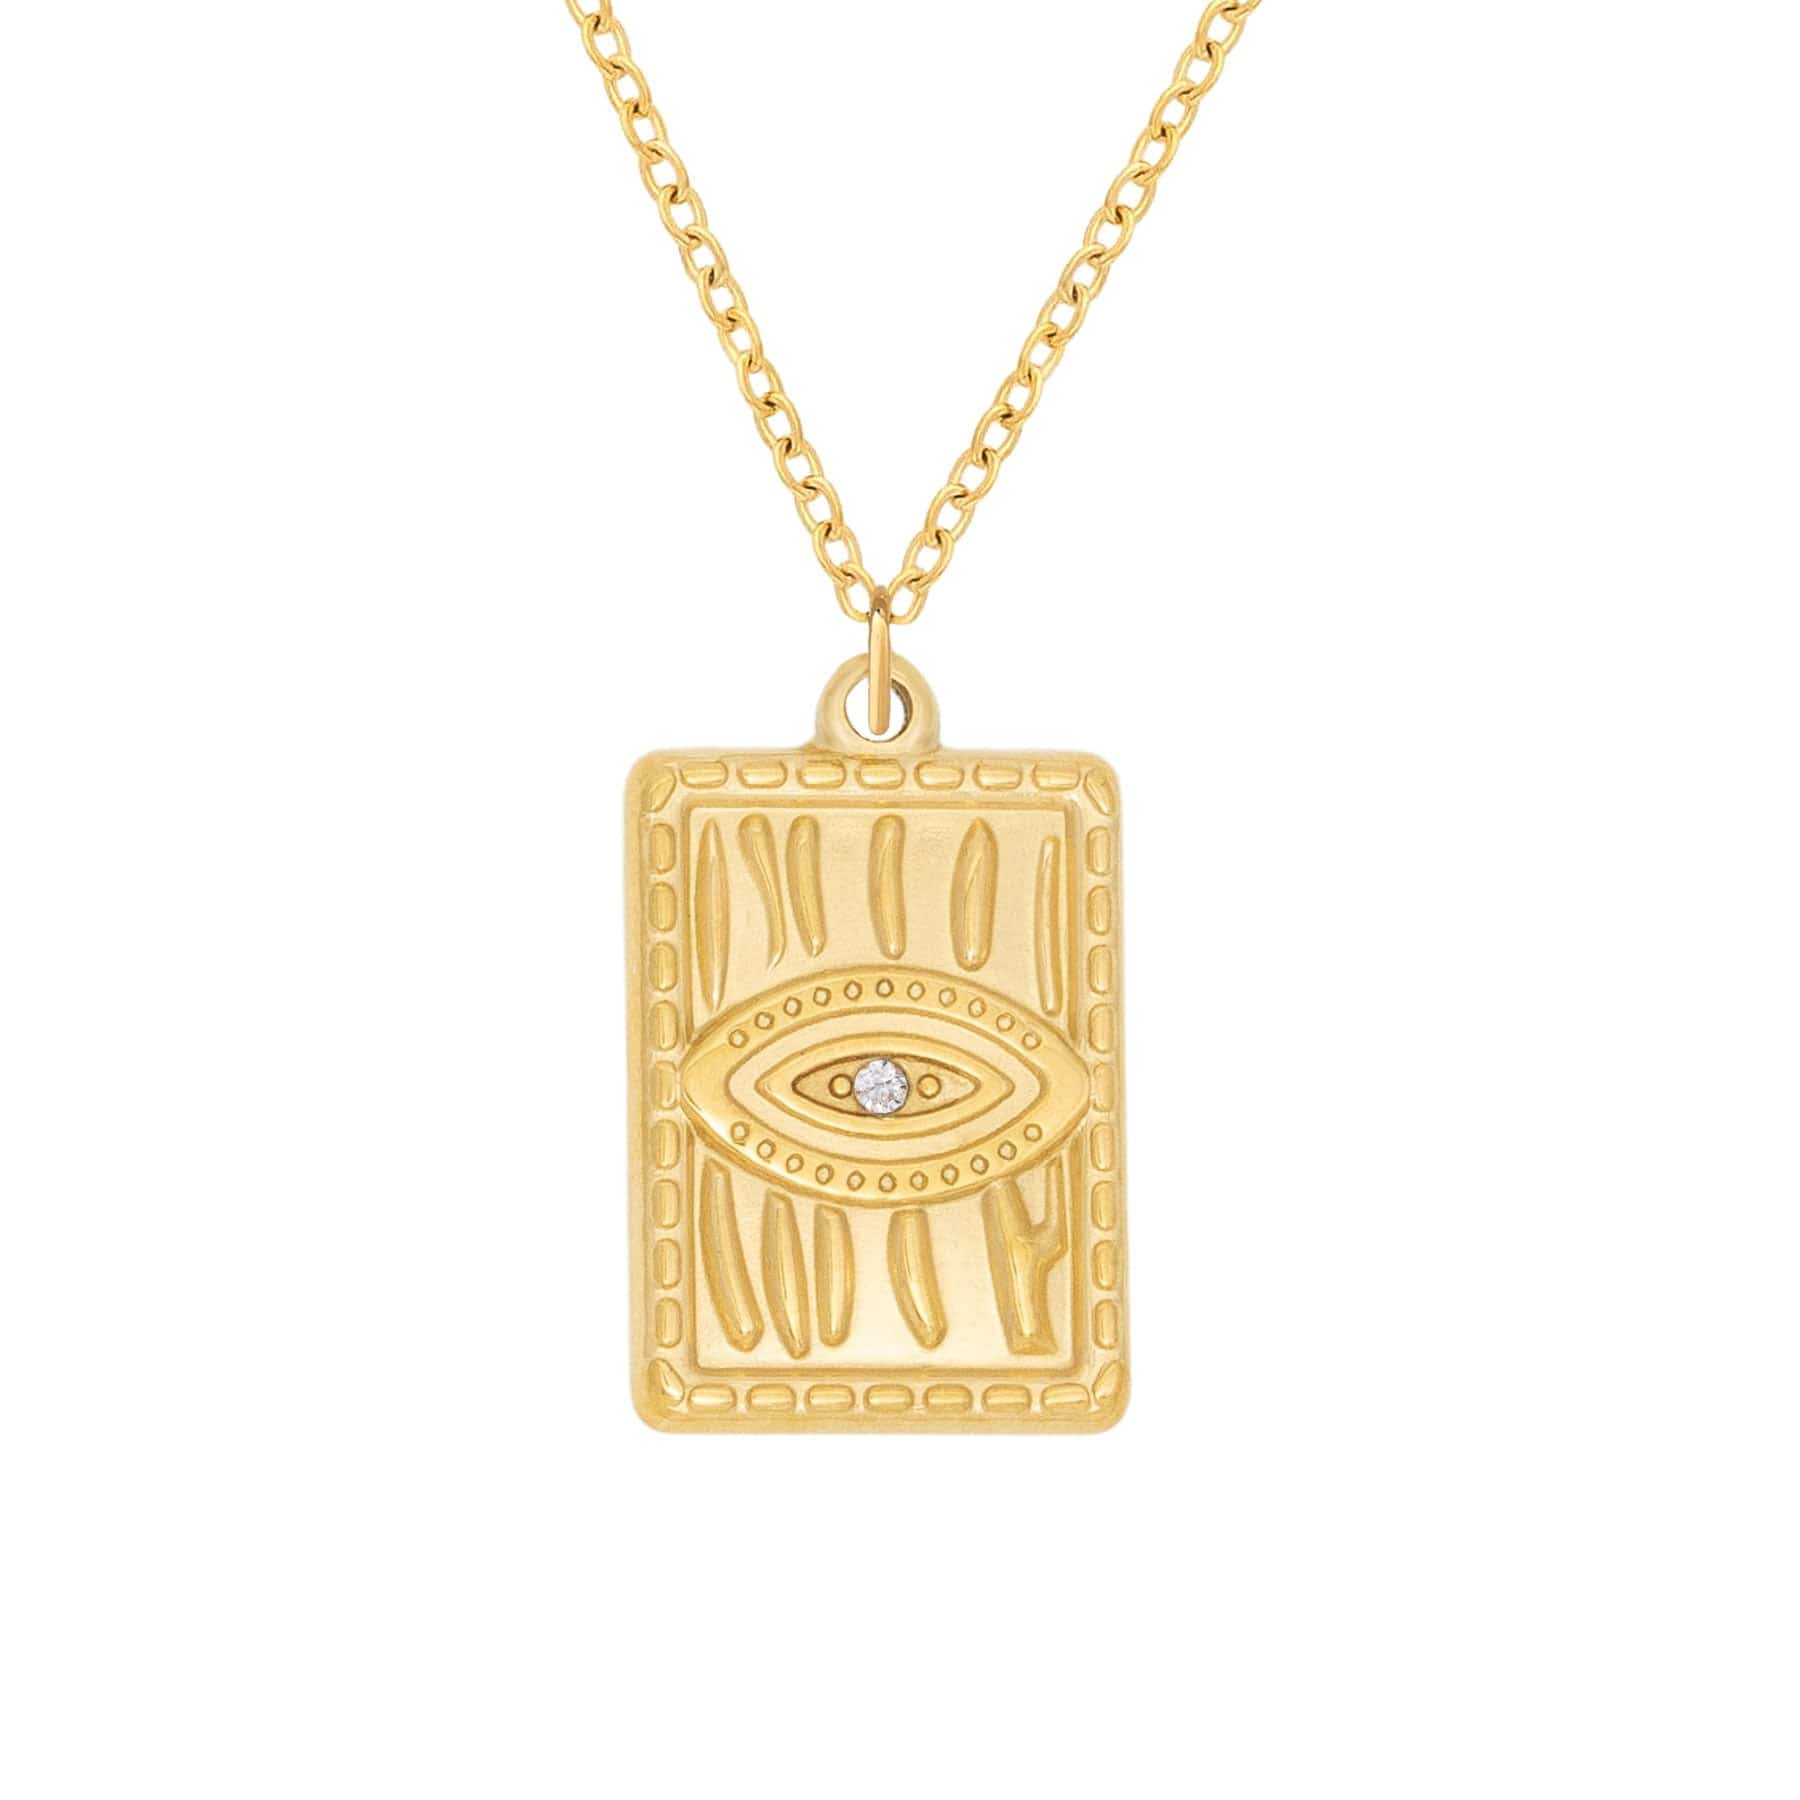 BohoMoon Stainless Steel Virtue Necklace Gold